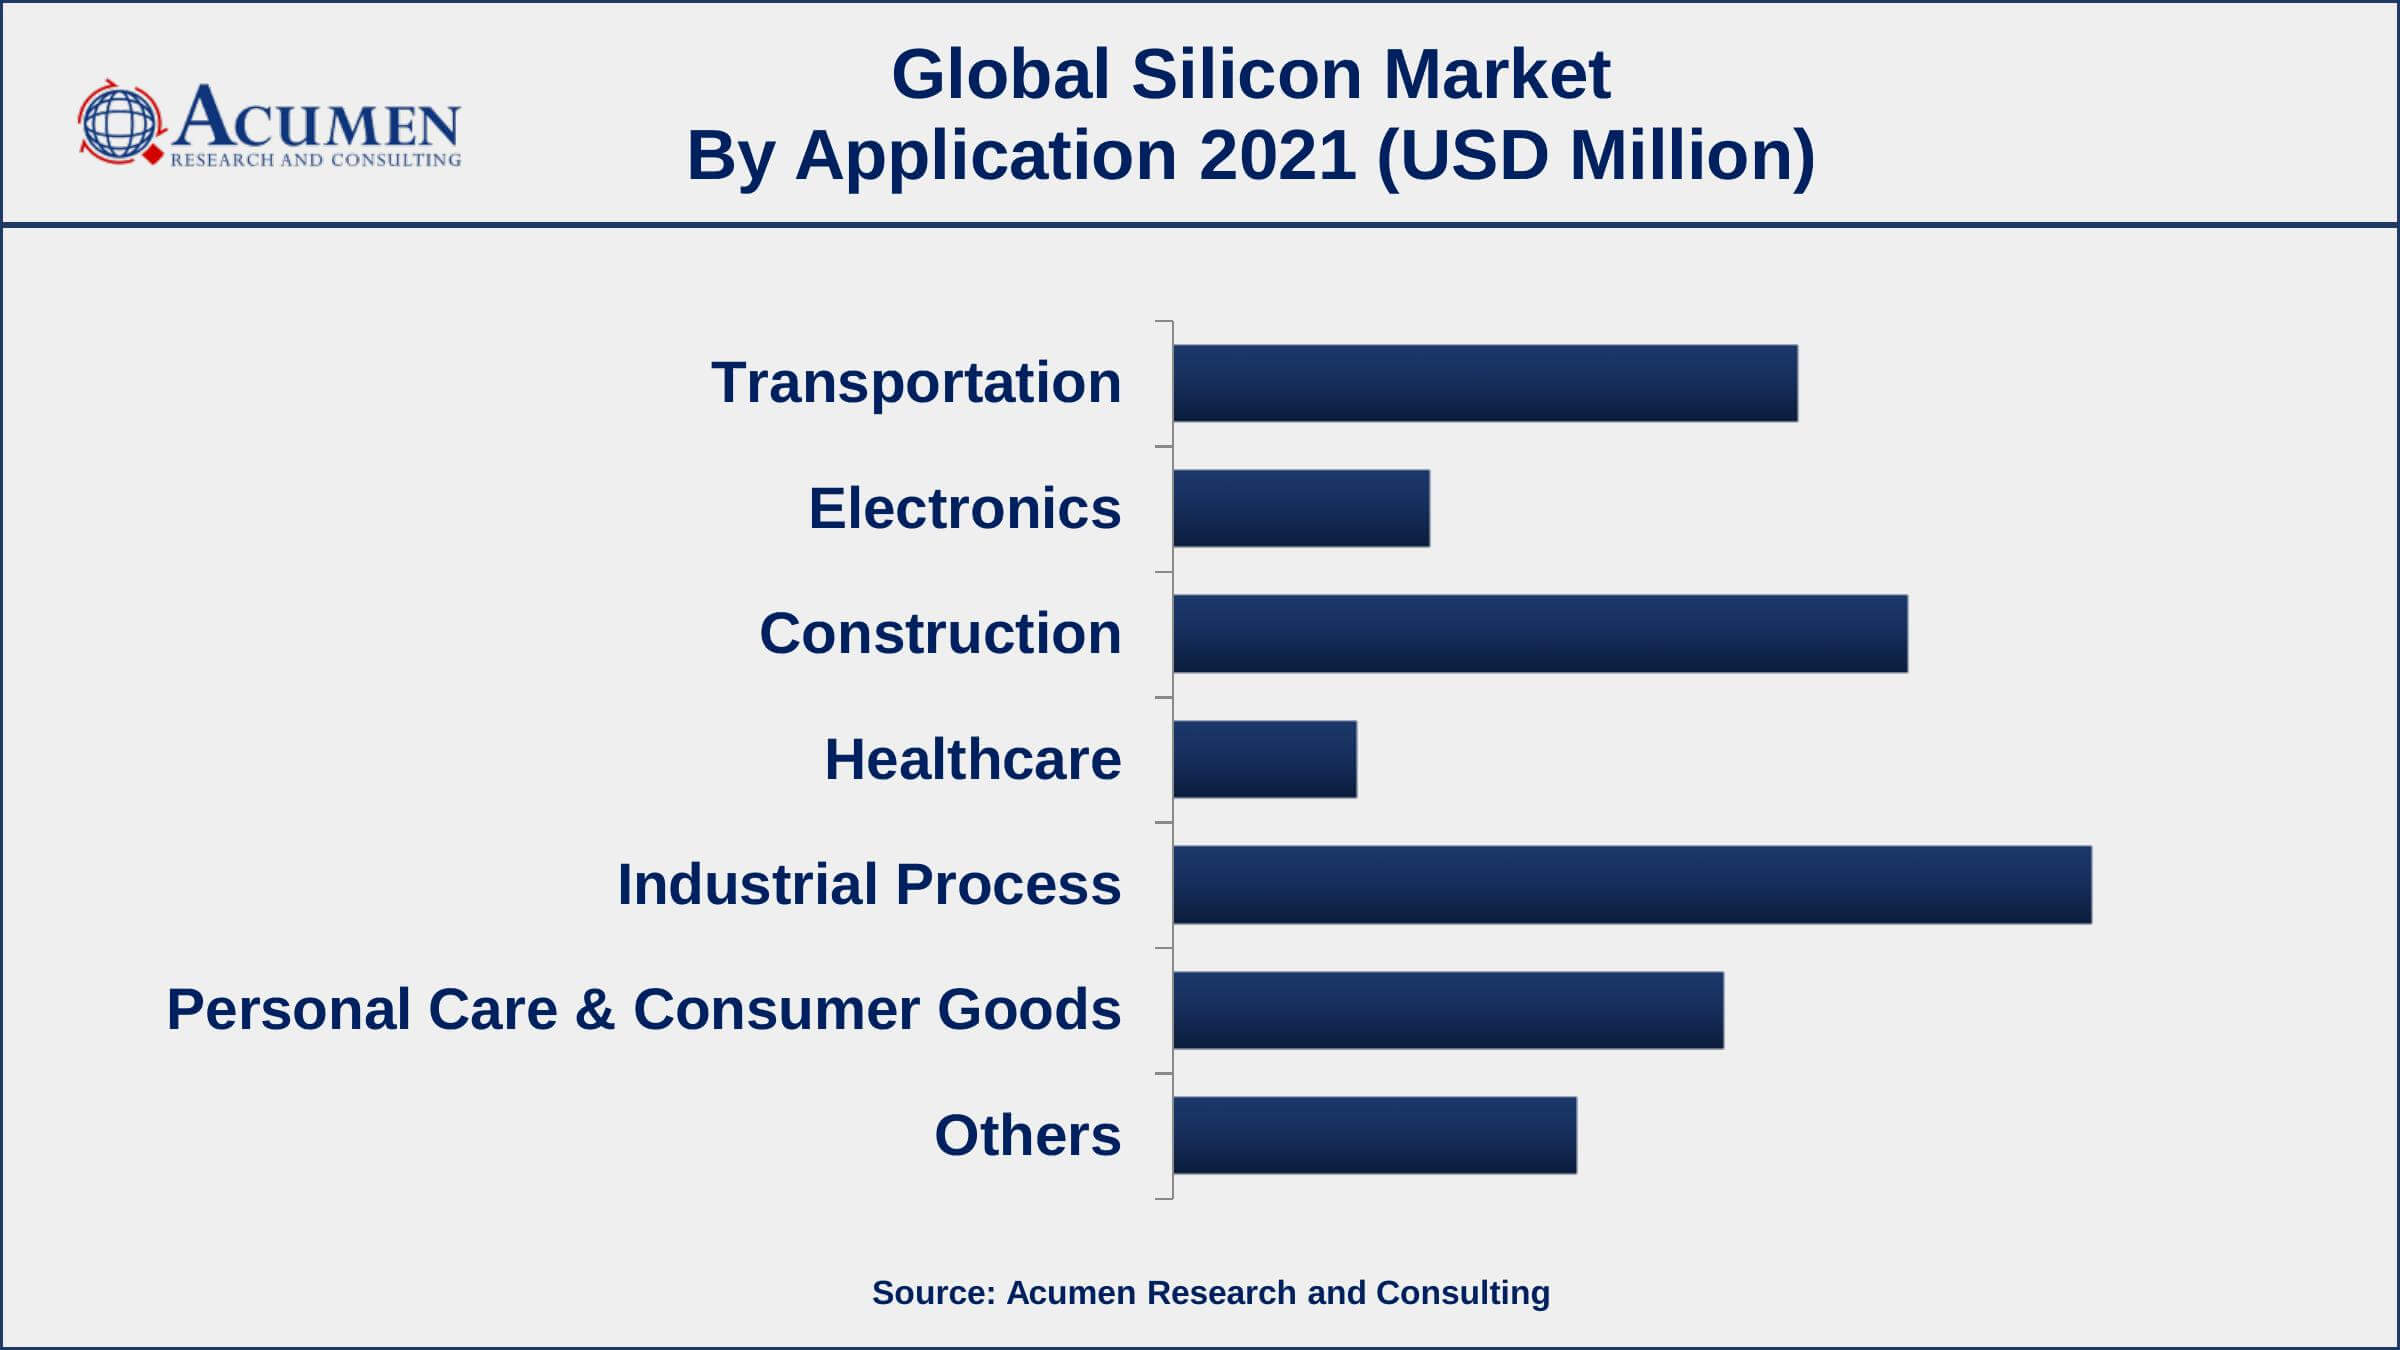 Among application, industrial process segment engaged more than 24.9% of the total market share